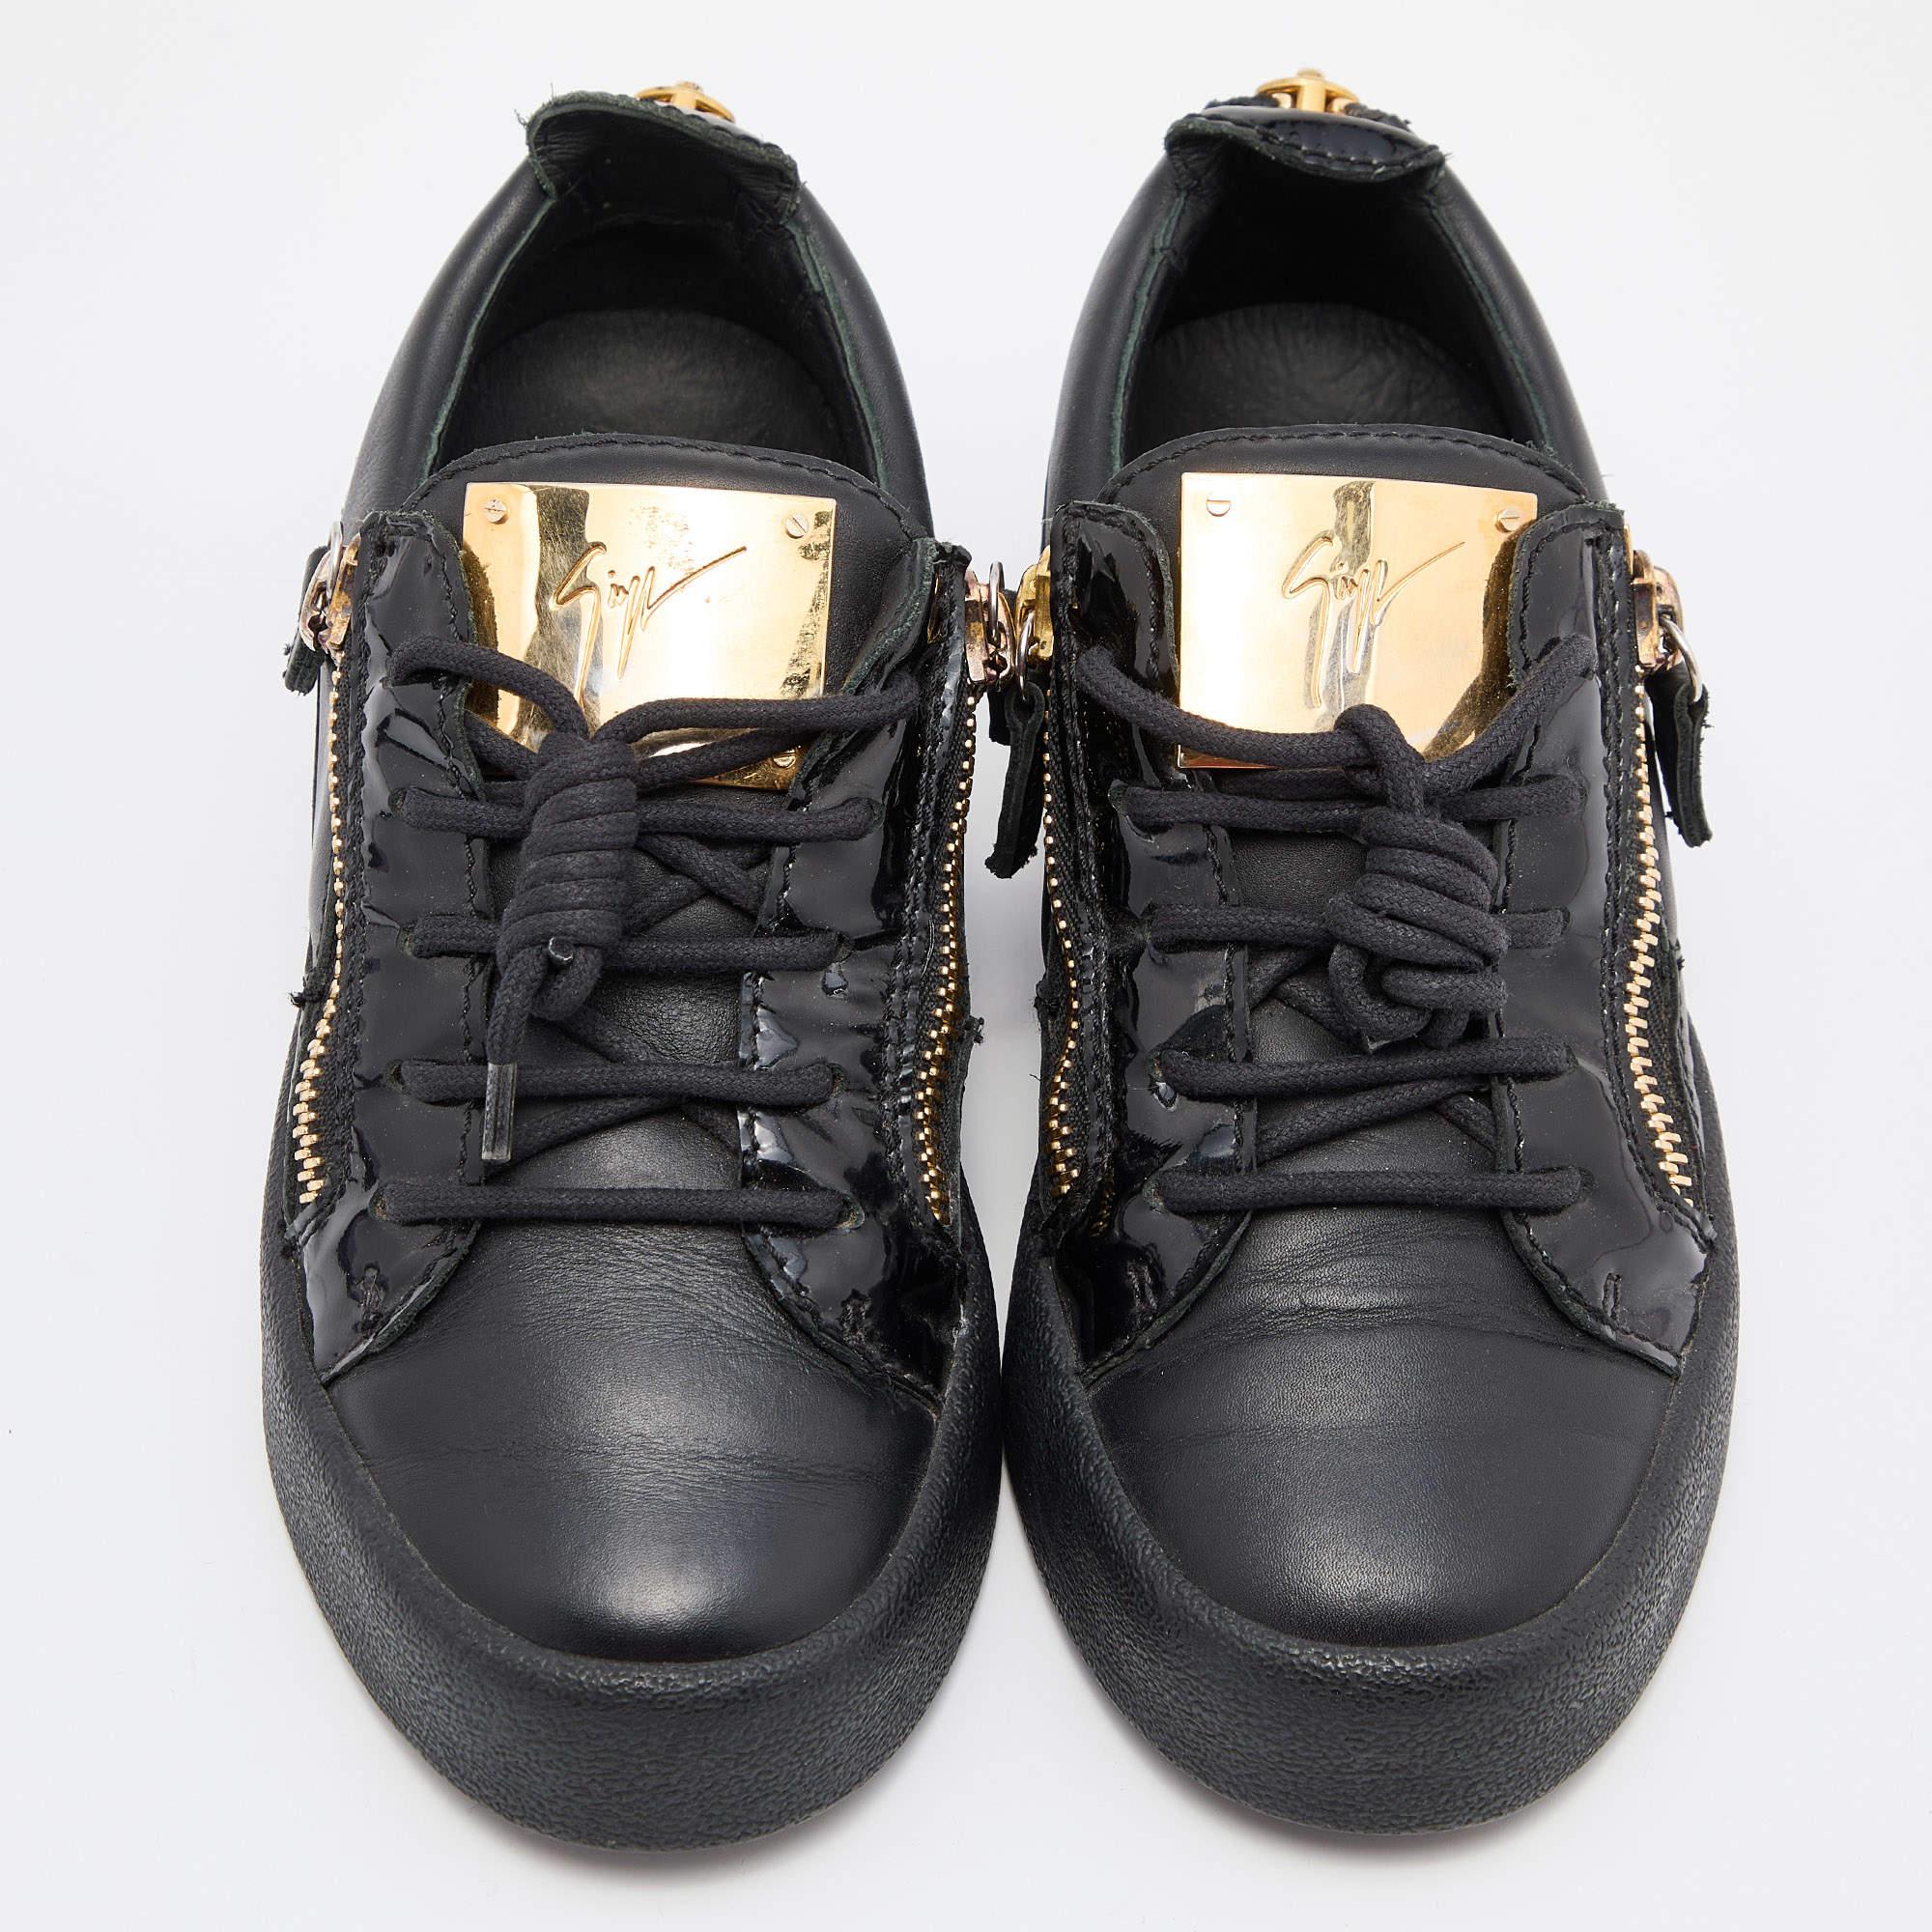 Sneakers are the best way to experience total comfort and luxury. These Gail sneakers from Giuseppe Zanotti are super sturdy and stylish. They are crafted from black leather into a low-top profile. They showcase lace-ups, zipper fastening, and